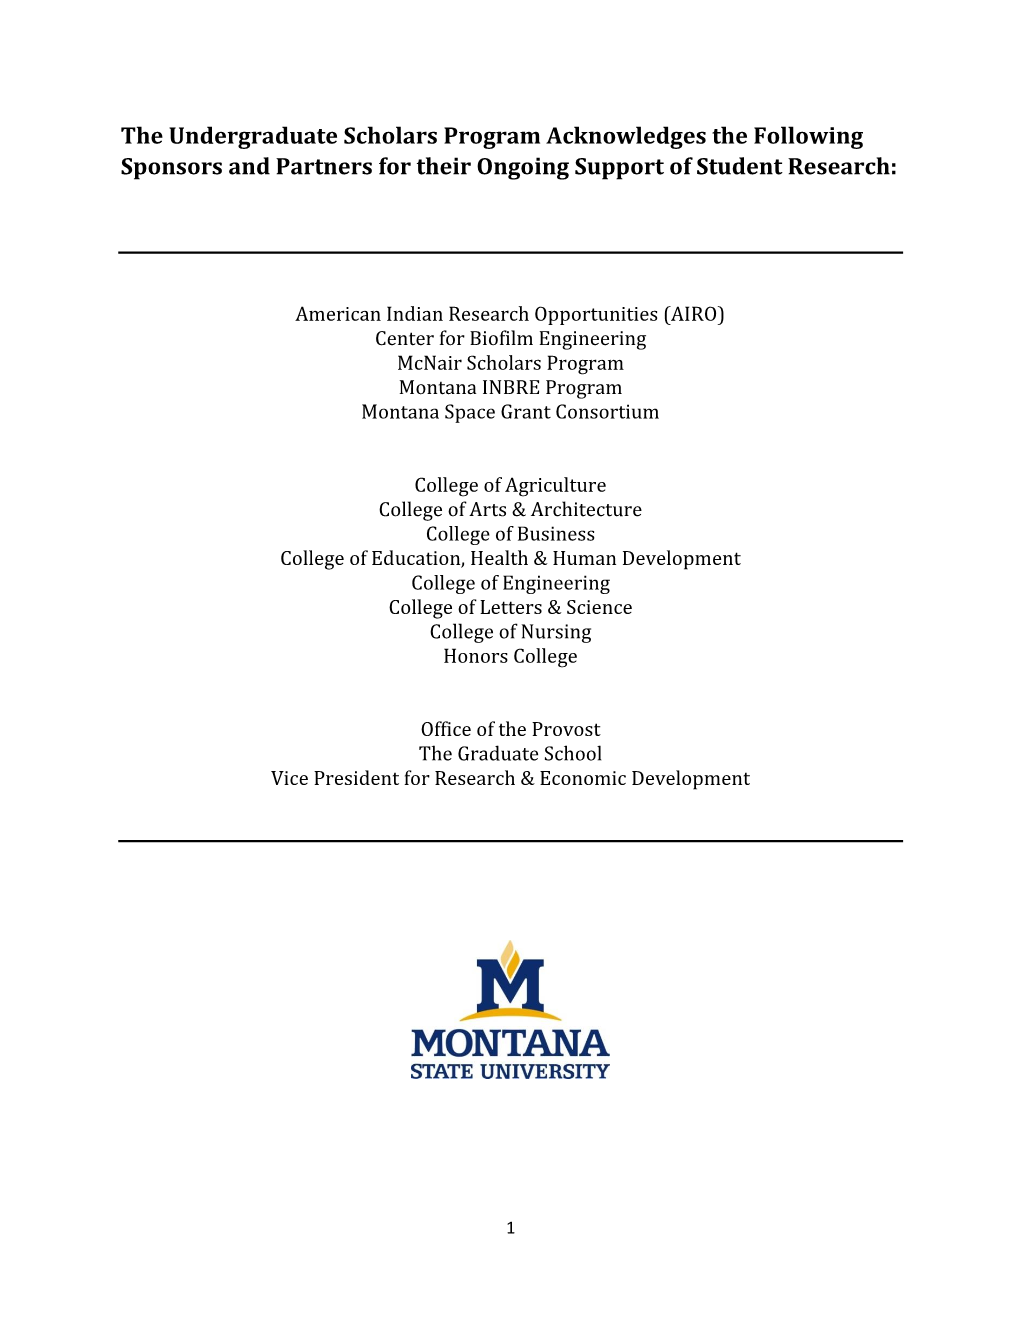 The Undergraduate Scholars Program Acknowledges the Following Sponsors and Partners for Their Ongoing Support of Student Research